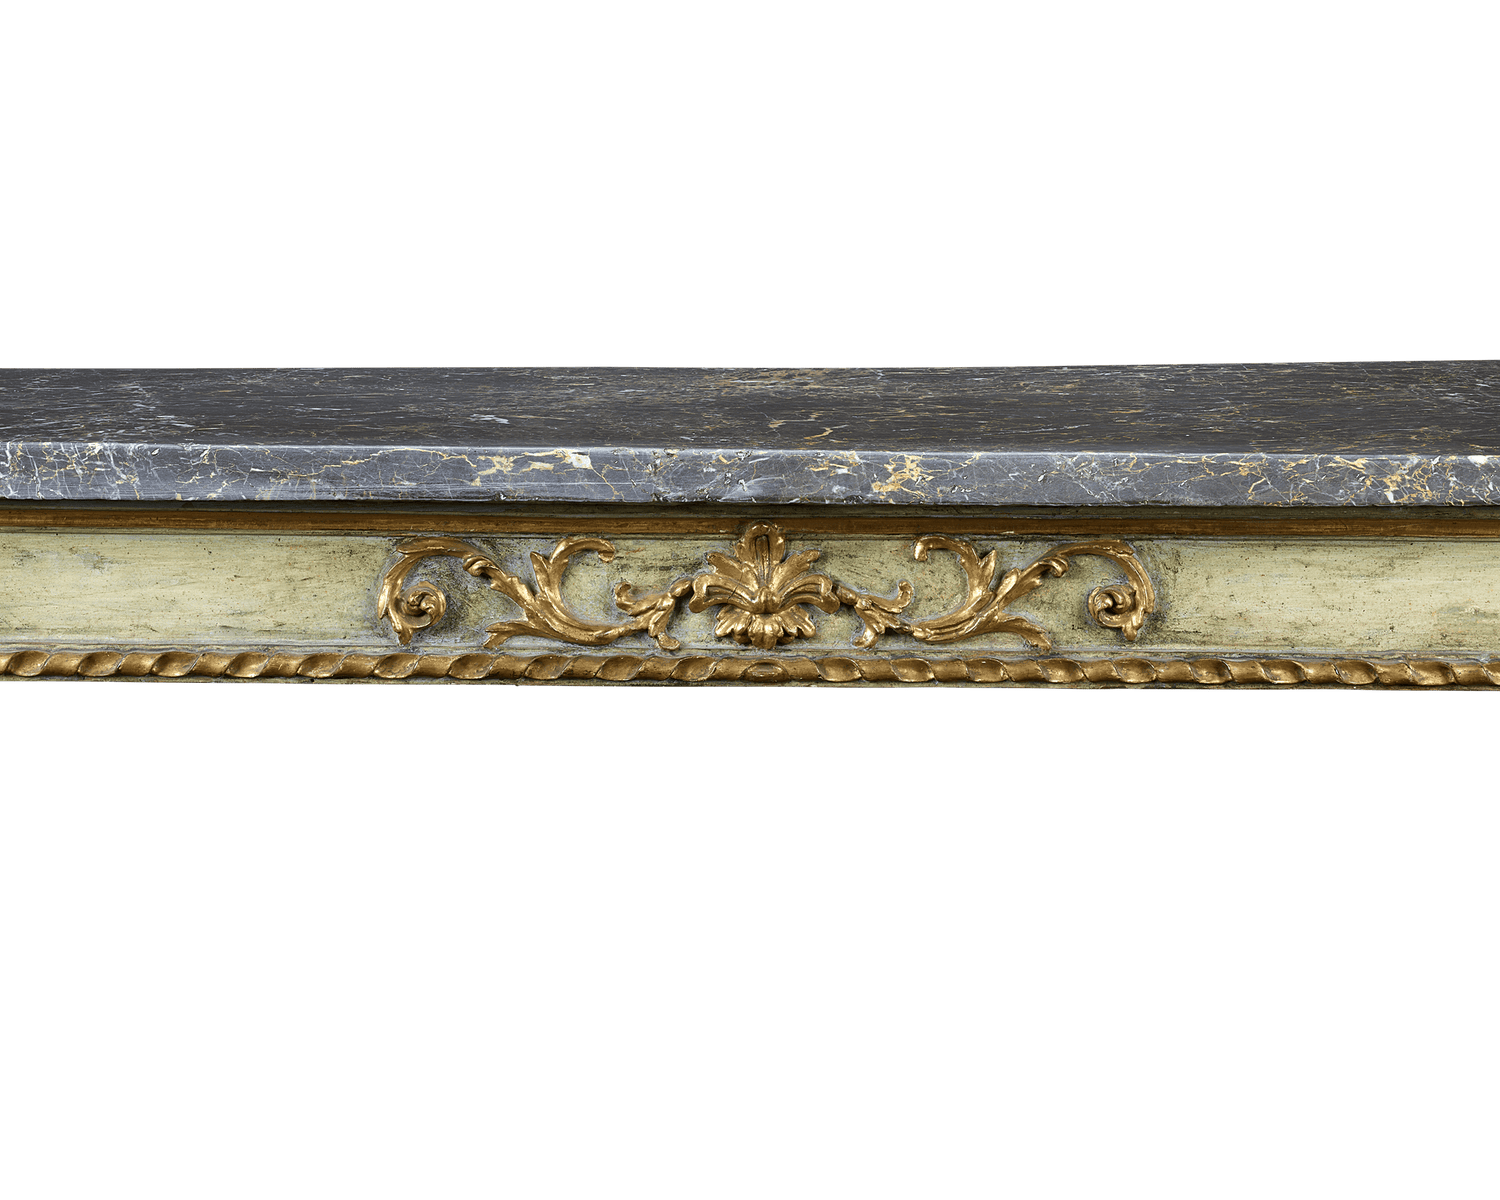 Pair of Louis XVI Console Tables